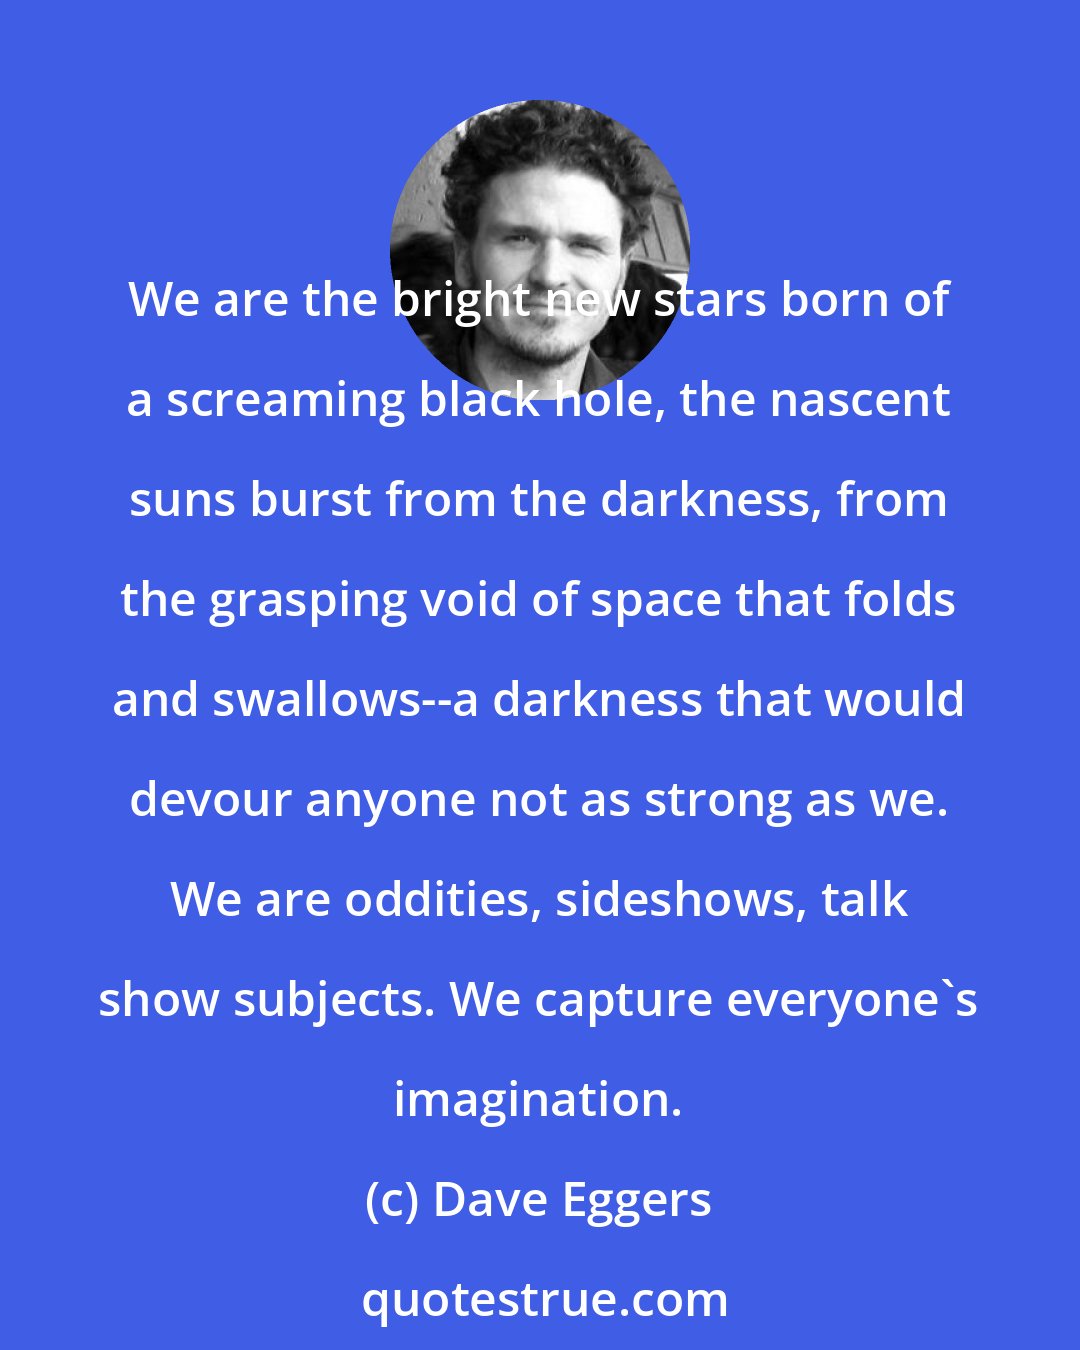 Dave Eggers: We are the bright new stars born of a screaming black hole, the nascent suns burst from the darkness, from the grasping void of space that folds and swallows--a darkness that would devour anyone not as strong as we. We are oddities, sideshows, talk show subjects. We capture everyone's imagination.